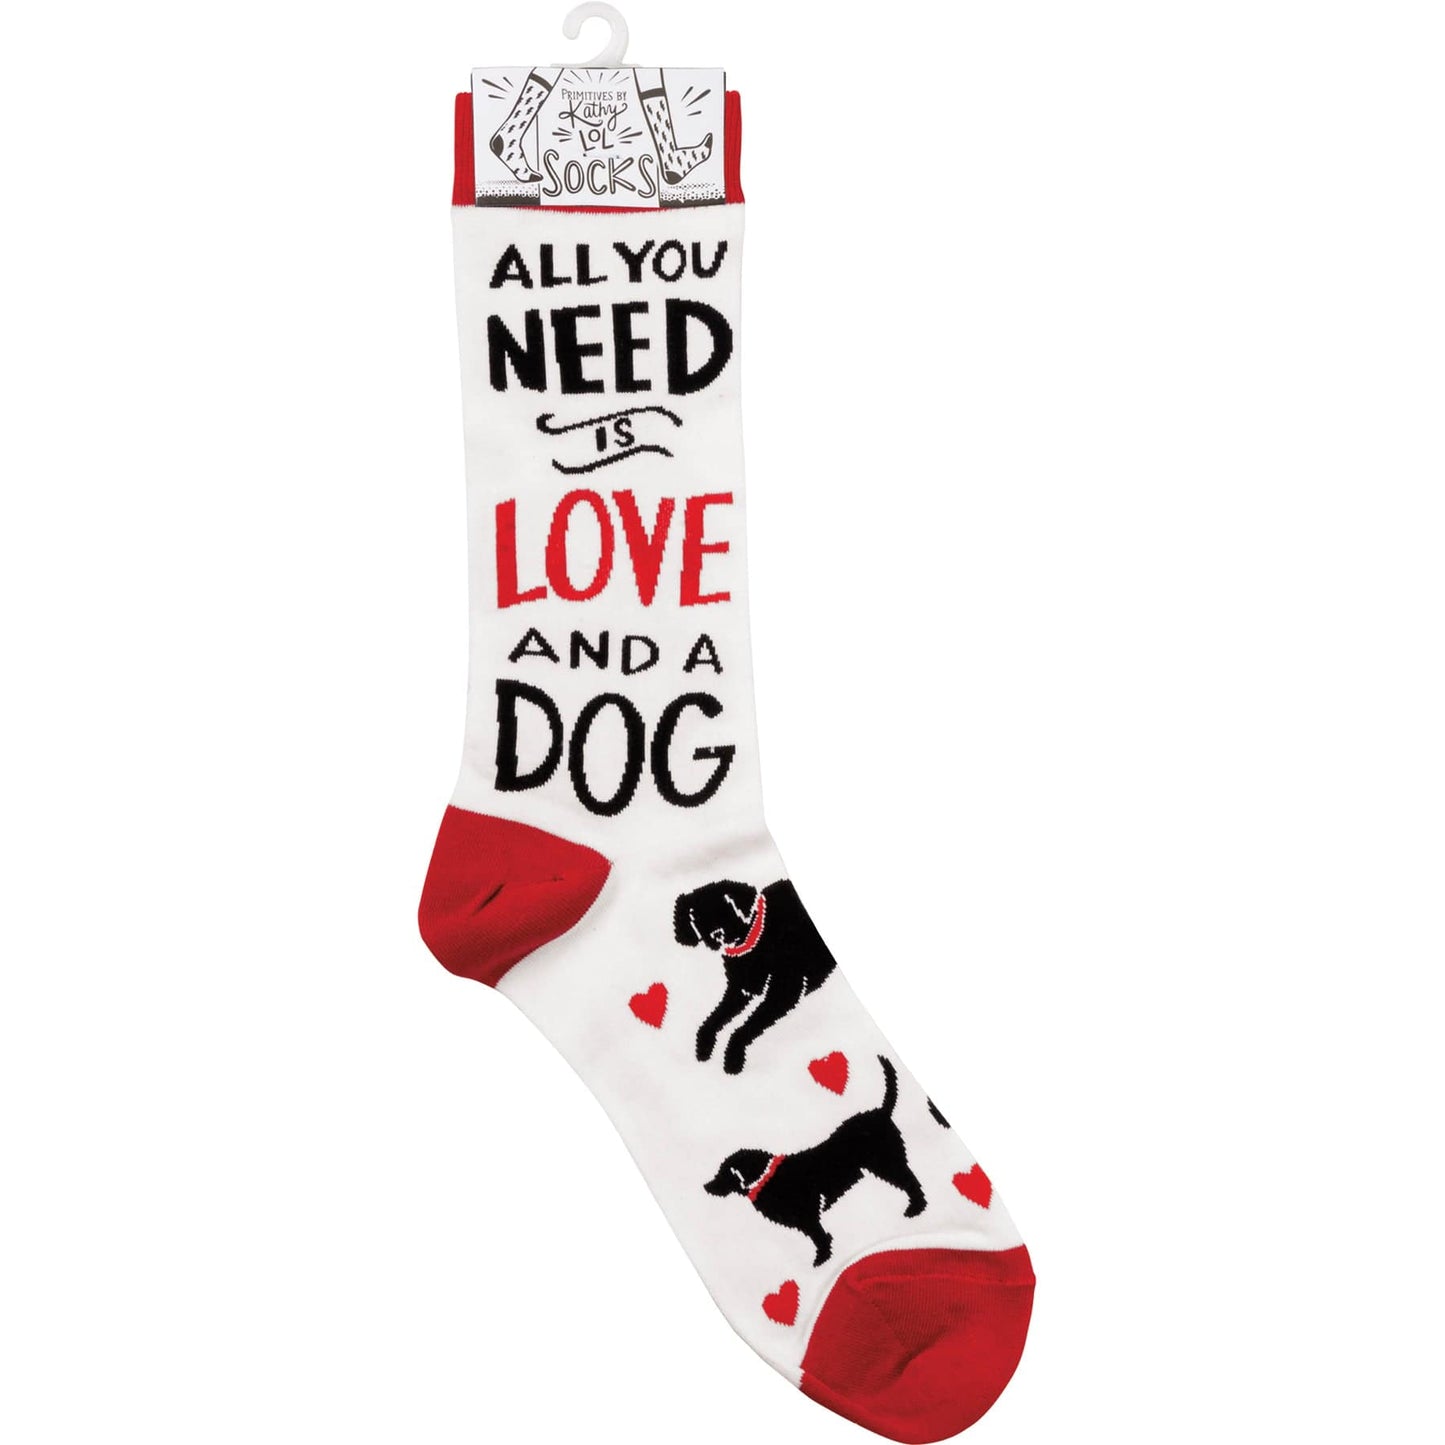 Socks One Size Fits Most Socks - All You Need Is Love And A Dog PBK-34678